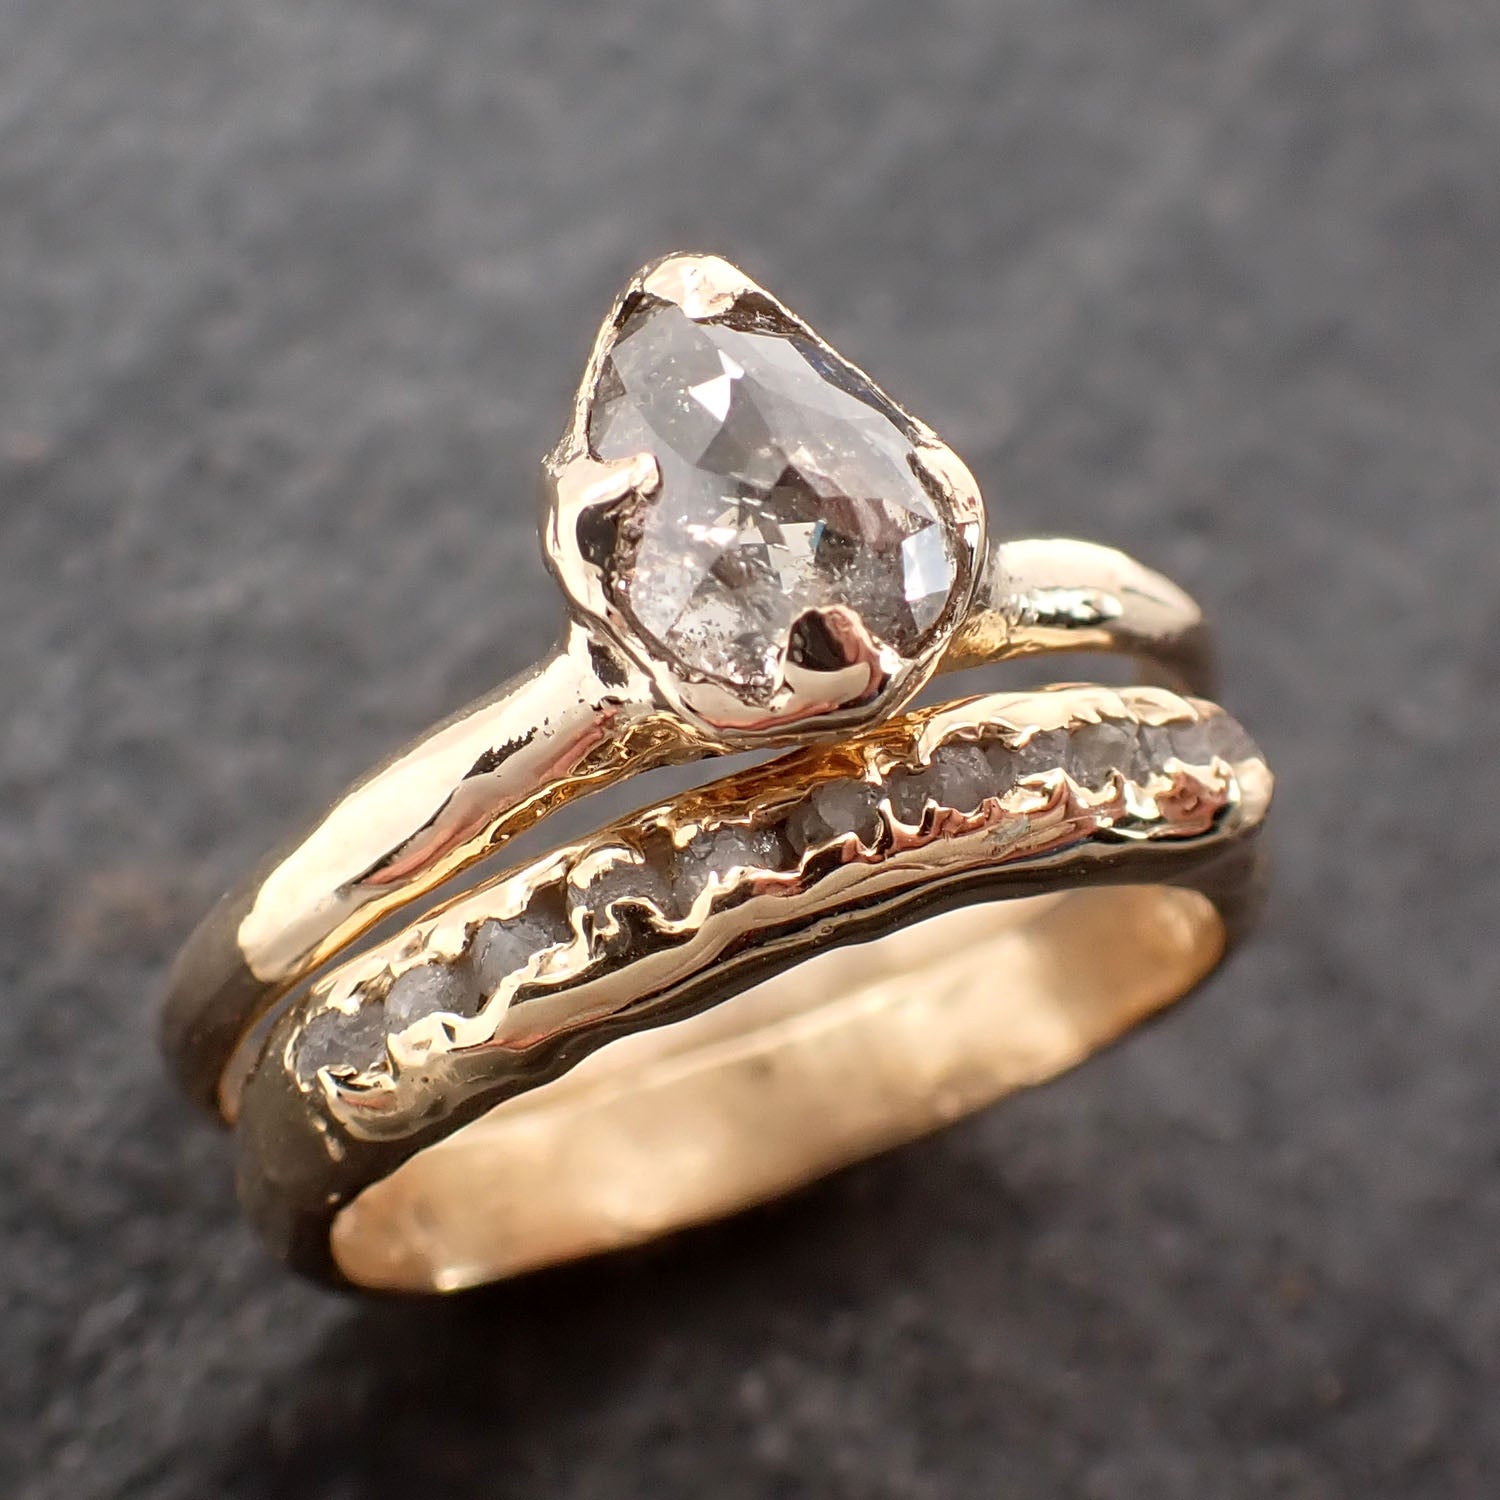 Fancy cut Salt and Pepper Diamond Solitaire Engagement 14k yellow Gold Wedding Ring byAngeline 2603